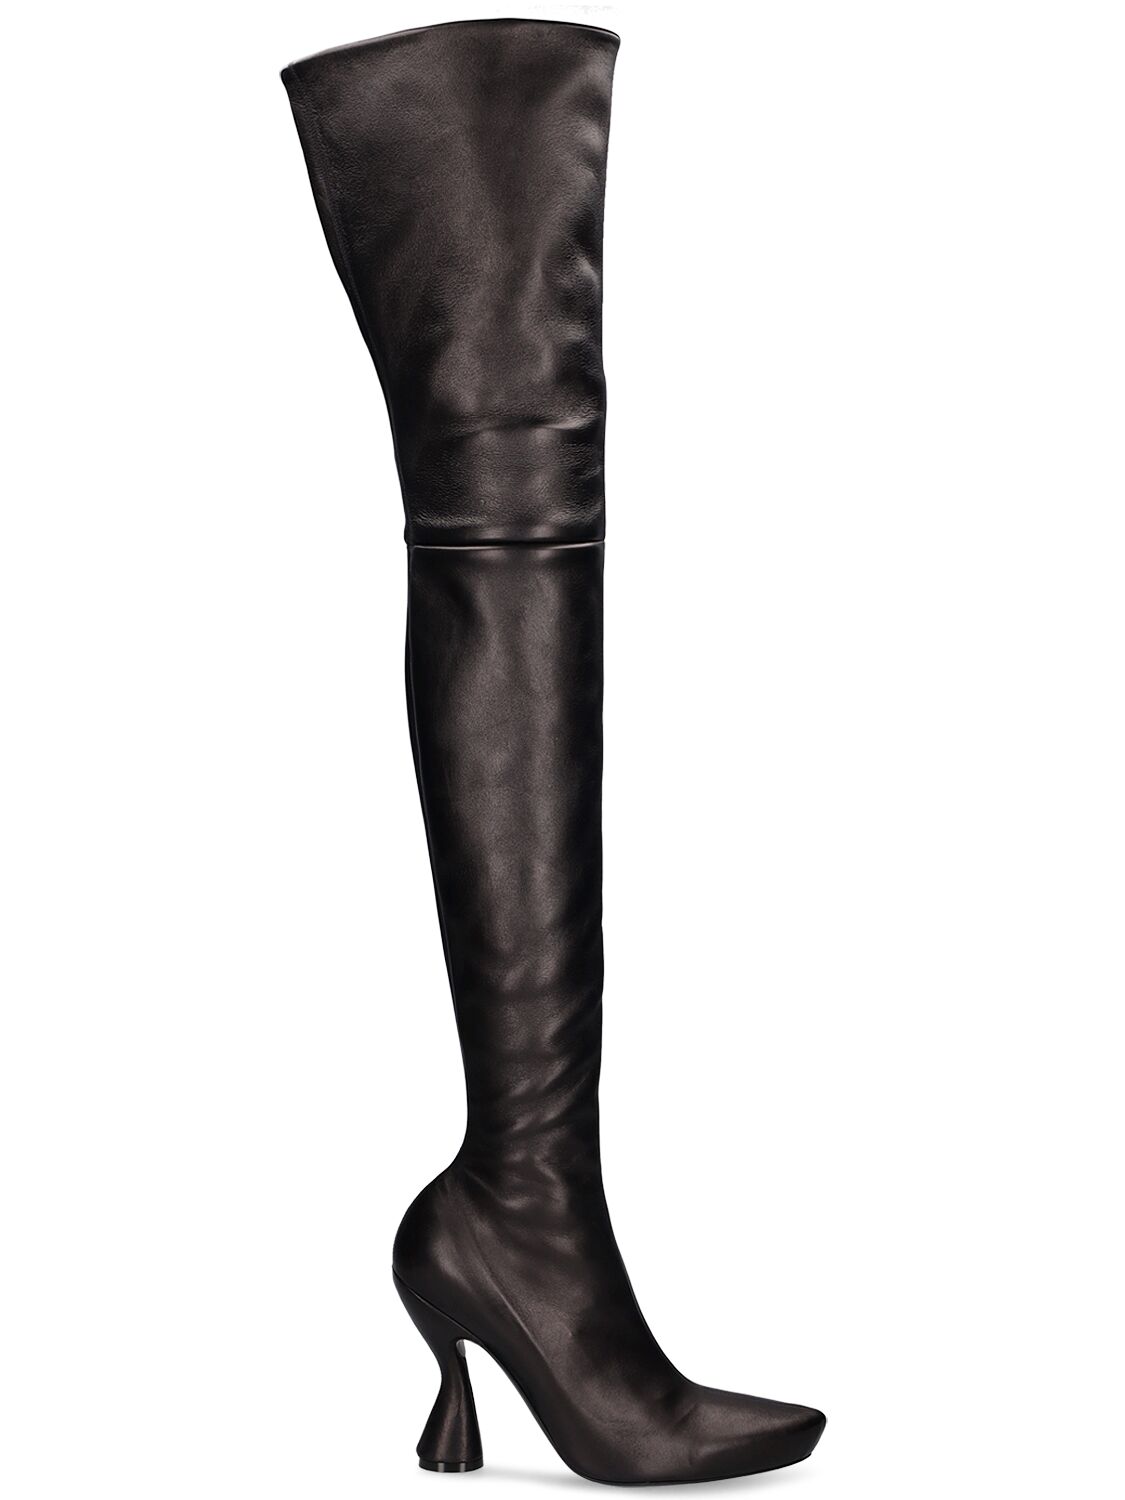 105mm Muse Knee High Leather Boots